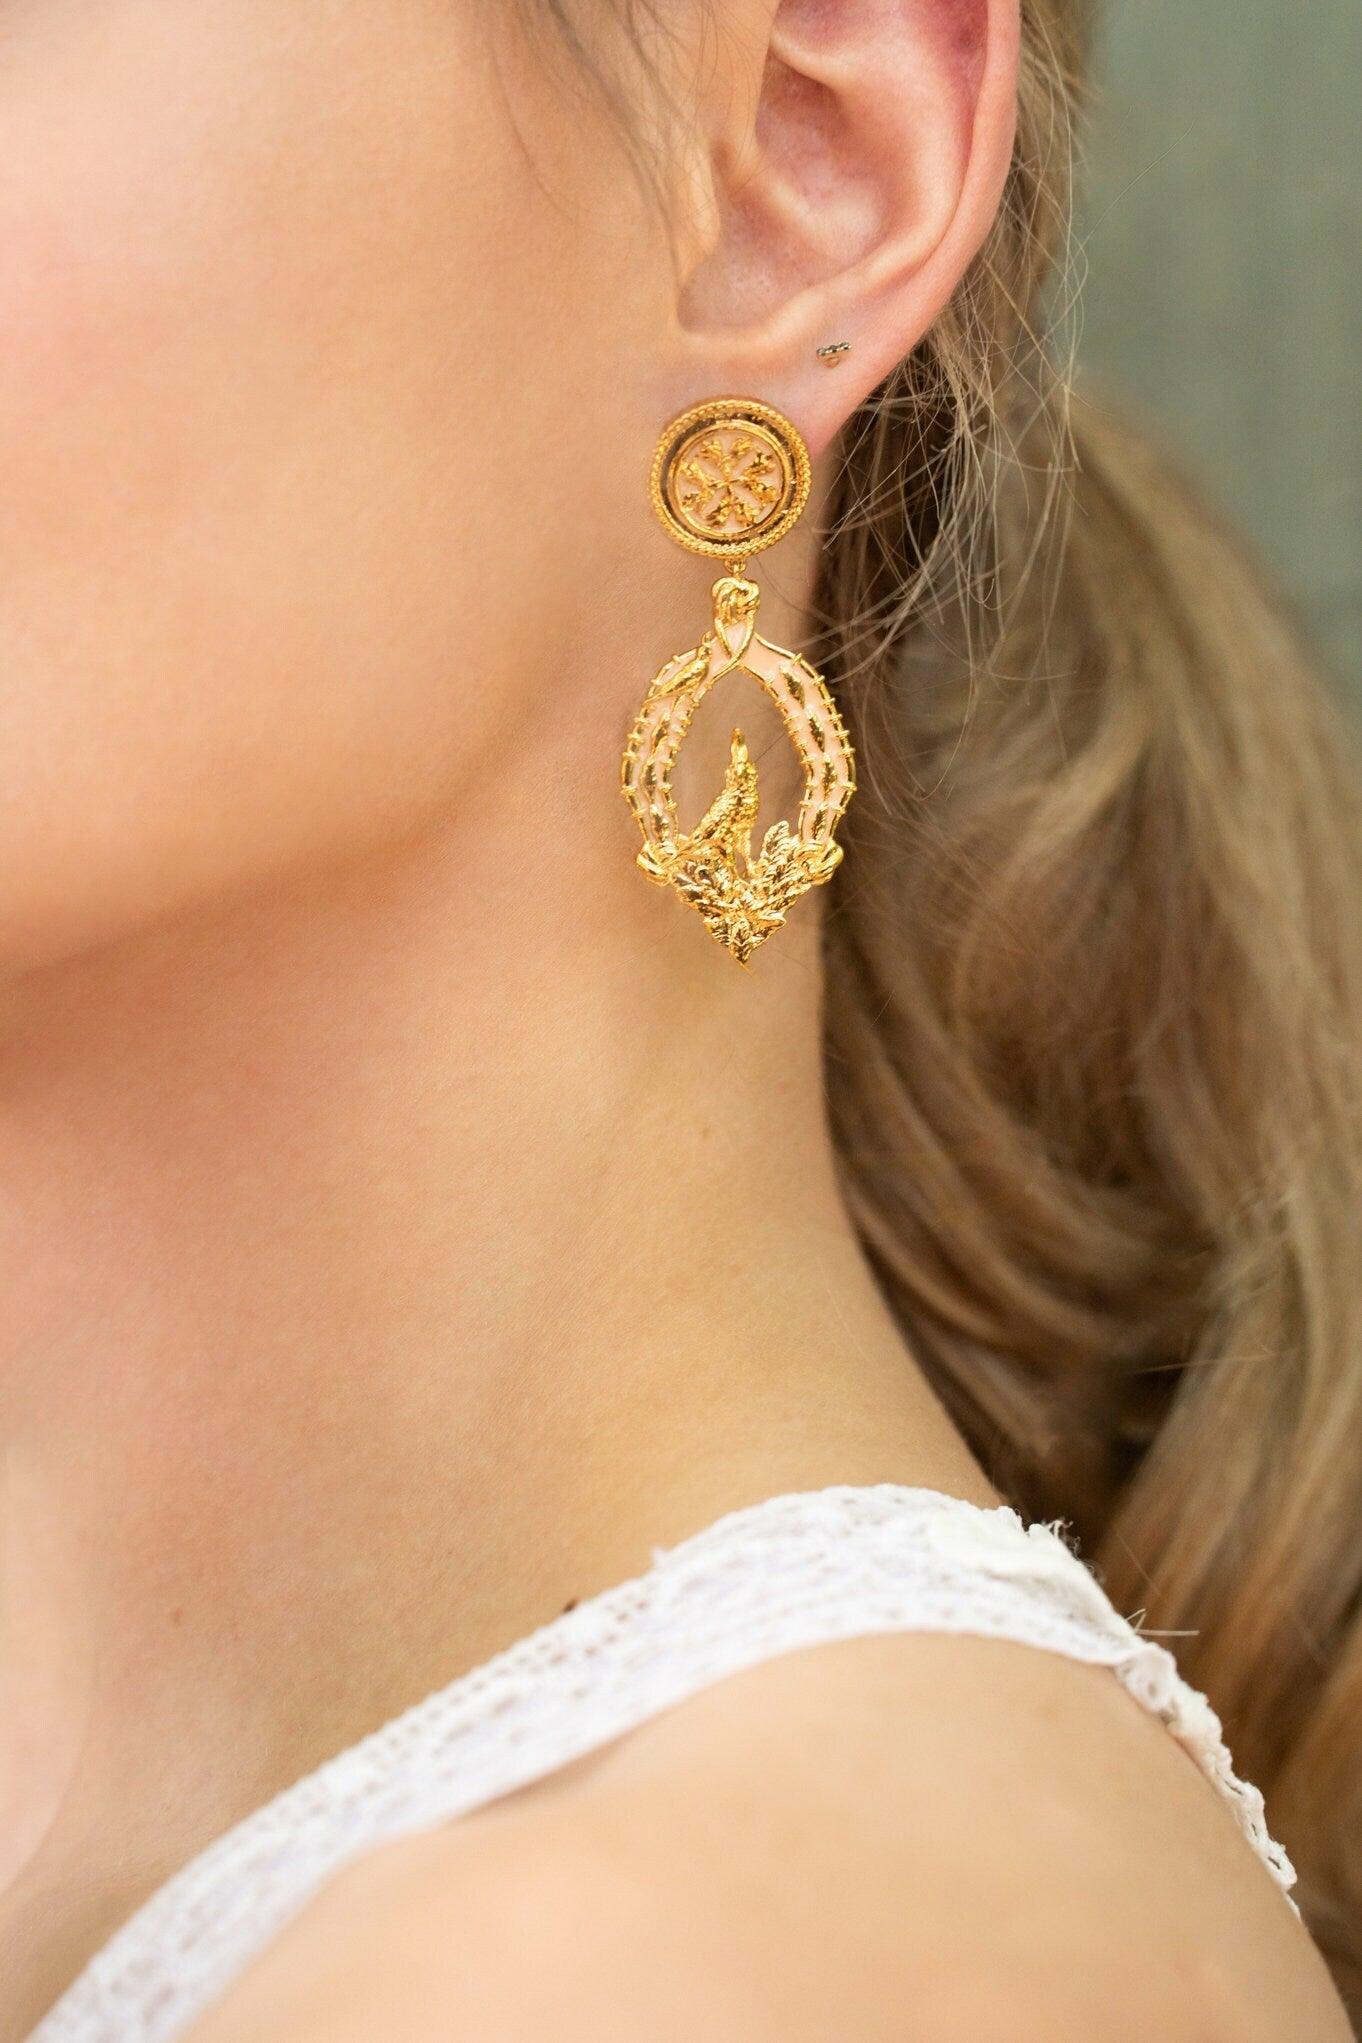 Unique Earrings "Vigor" Classic - Gold & Blush Jewelry, Gift, Gift for Mom, Artistic